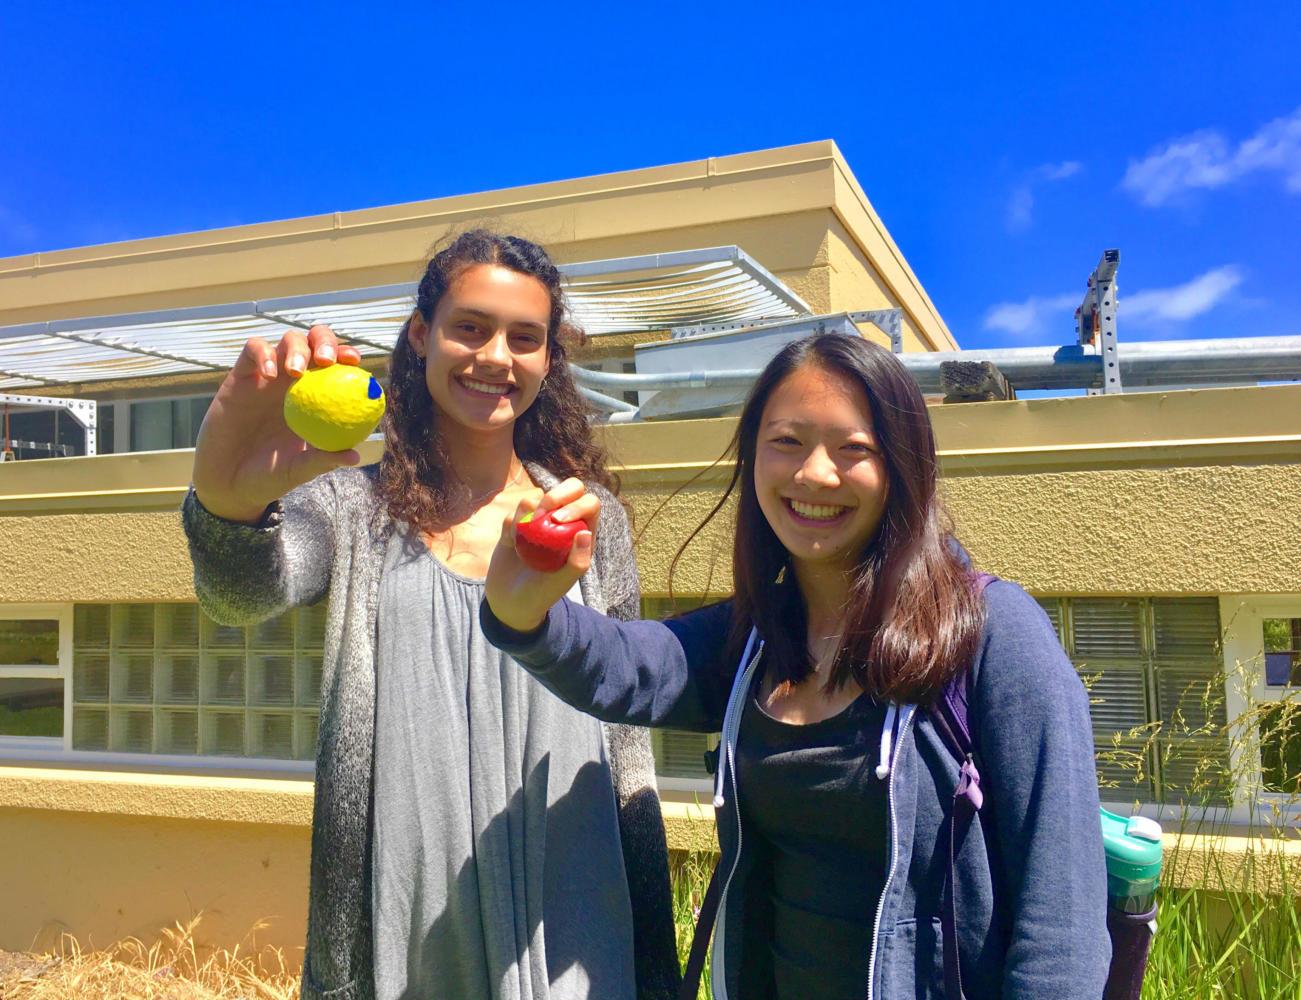 Relaxation Club co-founders Sophie Srivastava and Samantha Owyang, both juniors, display stress balls they made themselves as part of a club activity.